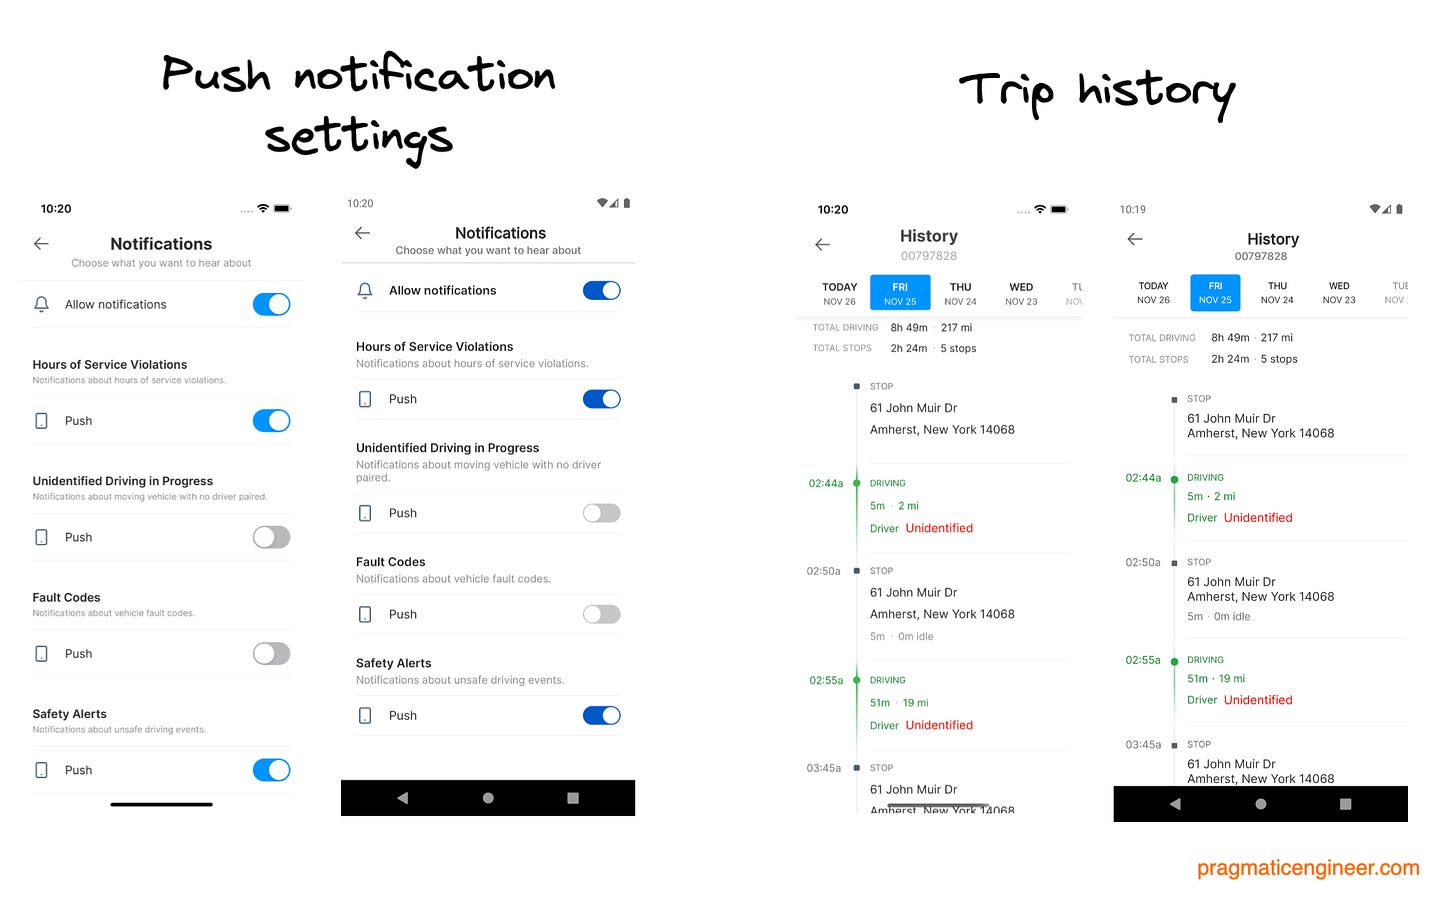 Push notification settings and Trip history in the Motive Fleets app. The UIs are nearly identical on iOS and Android.